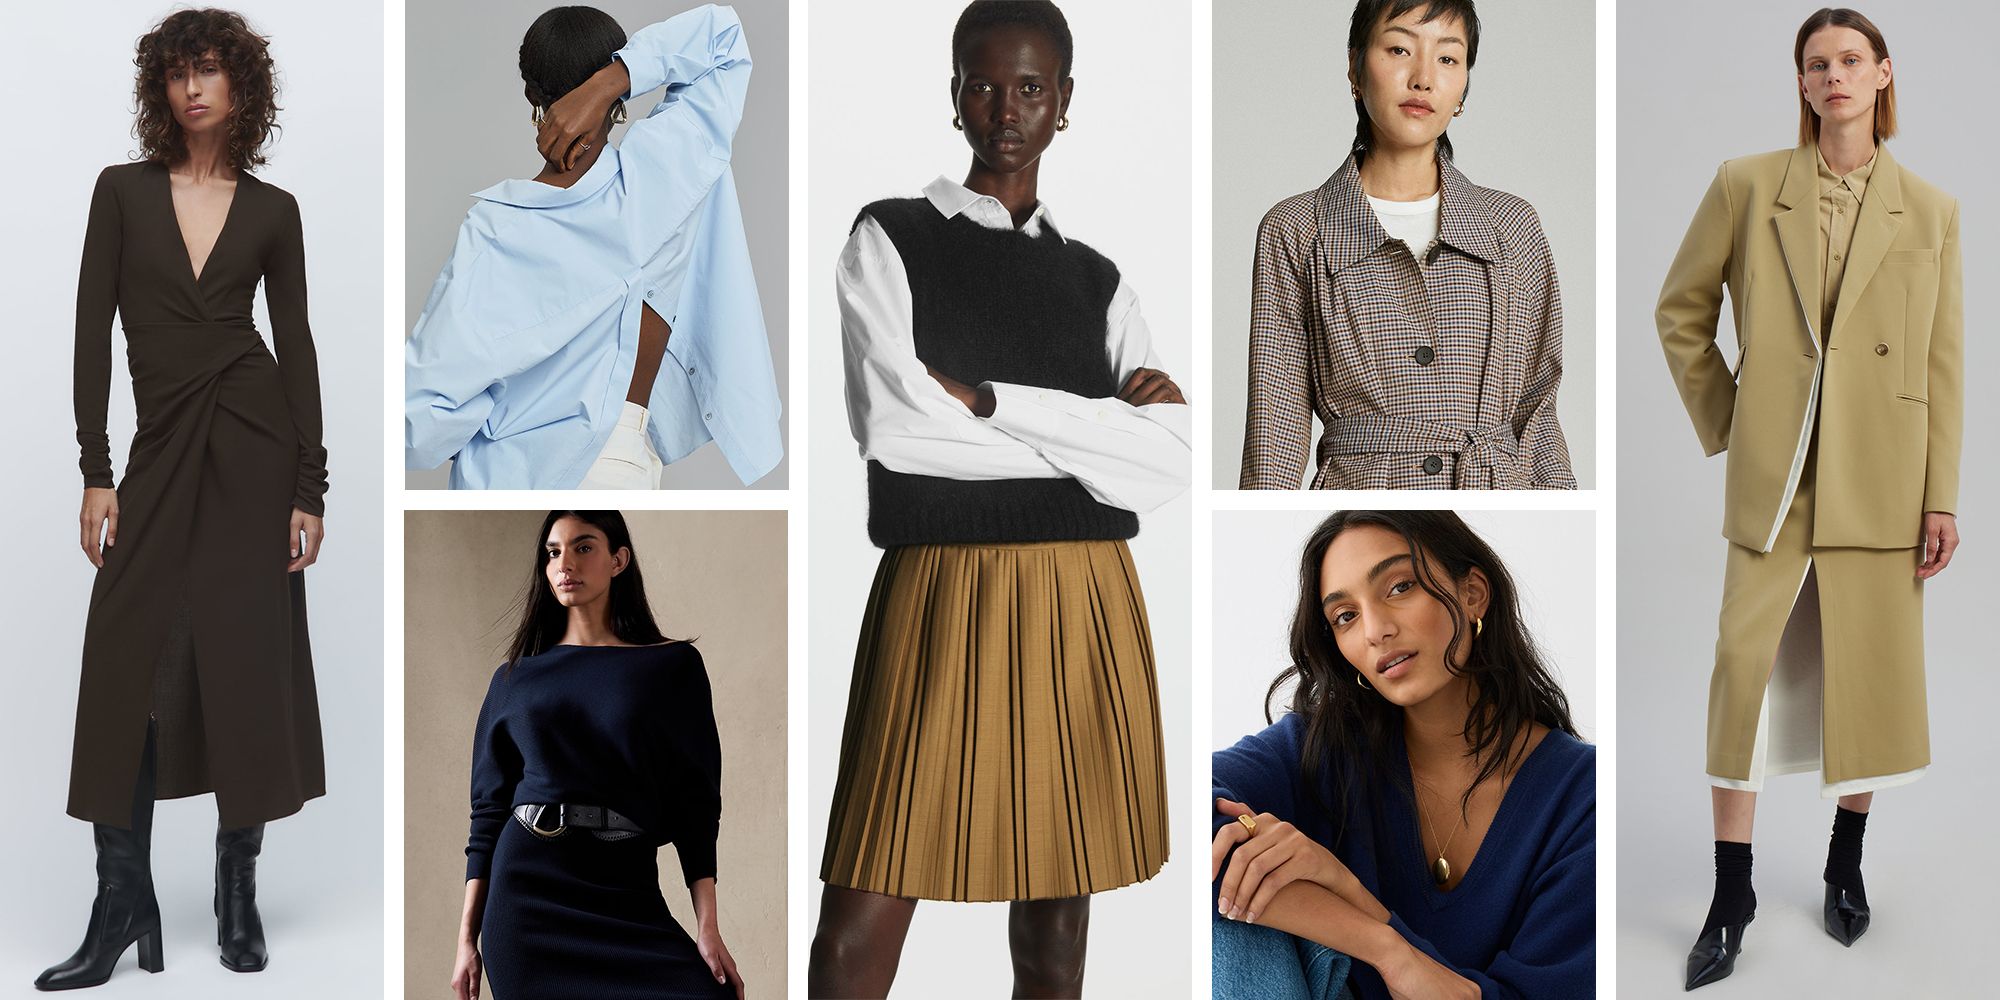 Professional Clothing for the Working Women: Almost 100 Styles to